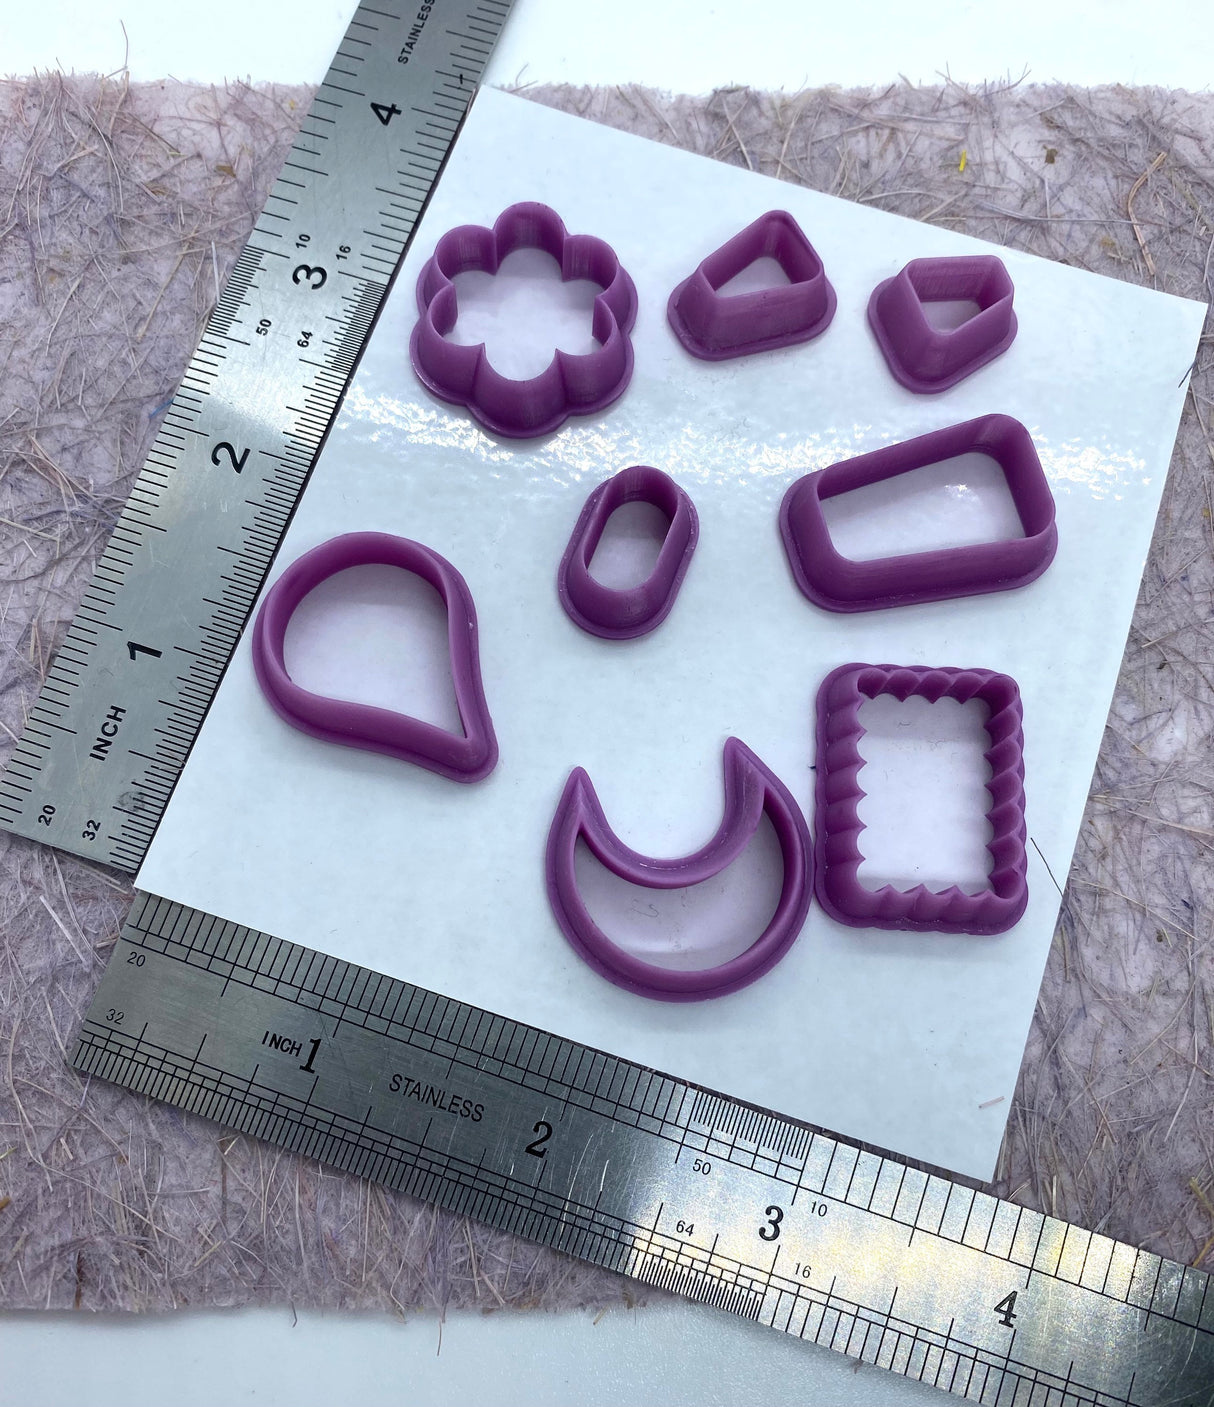 Resin polymer clay shape cutters, Gilly cutters (Kita MK i) precious metal, ceramic clay cutters, shapes